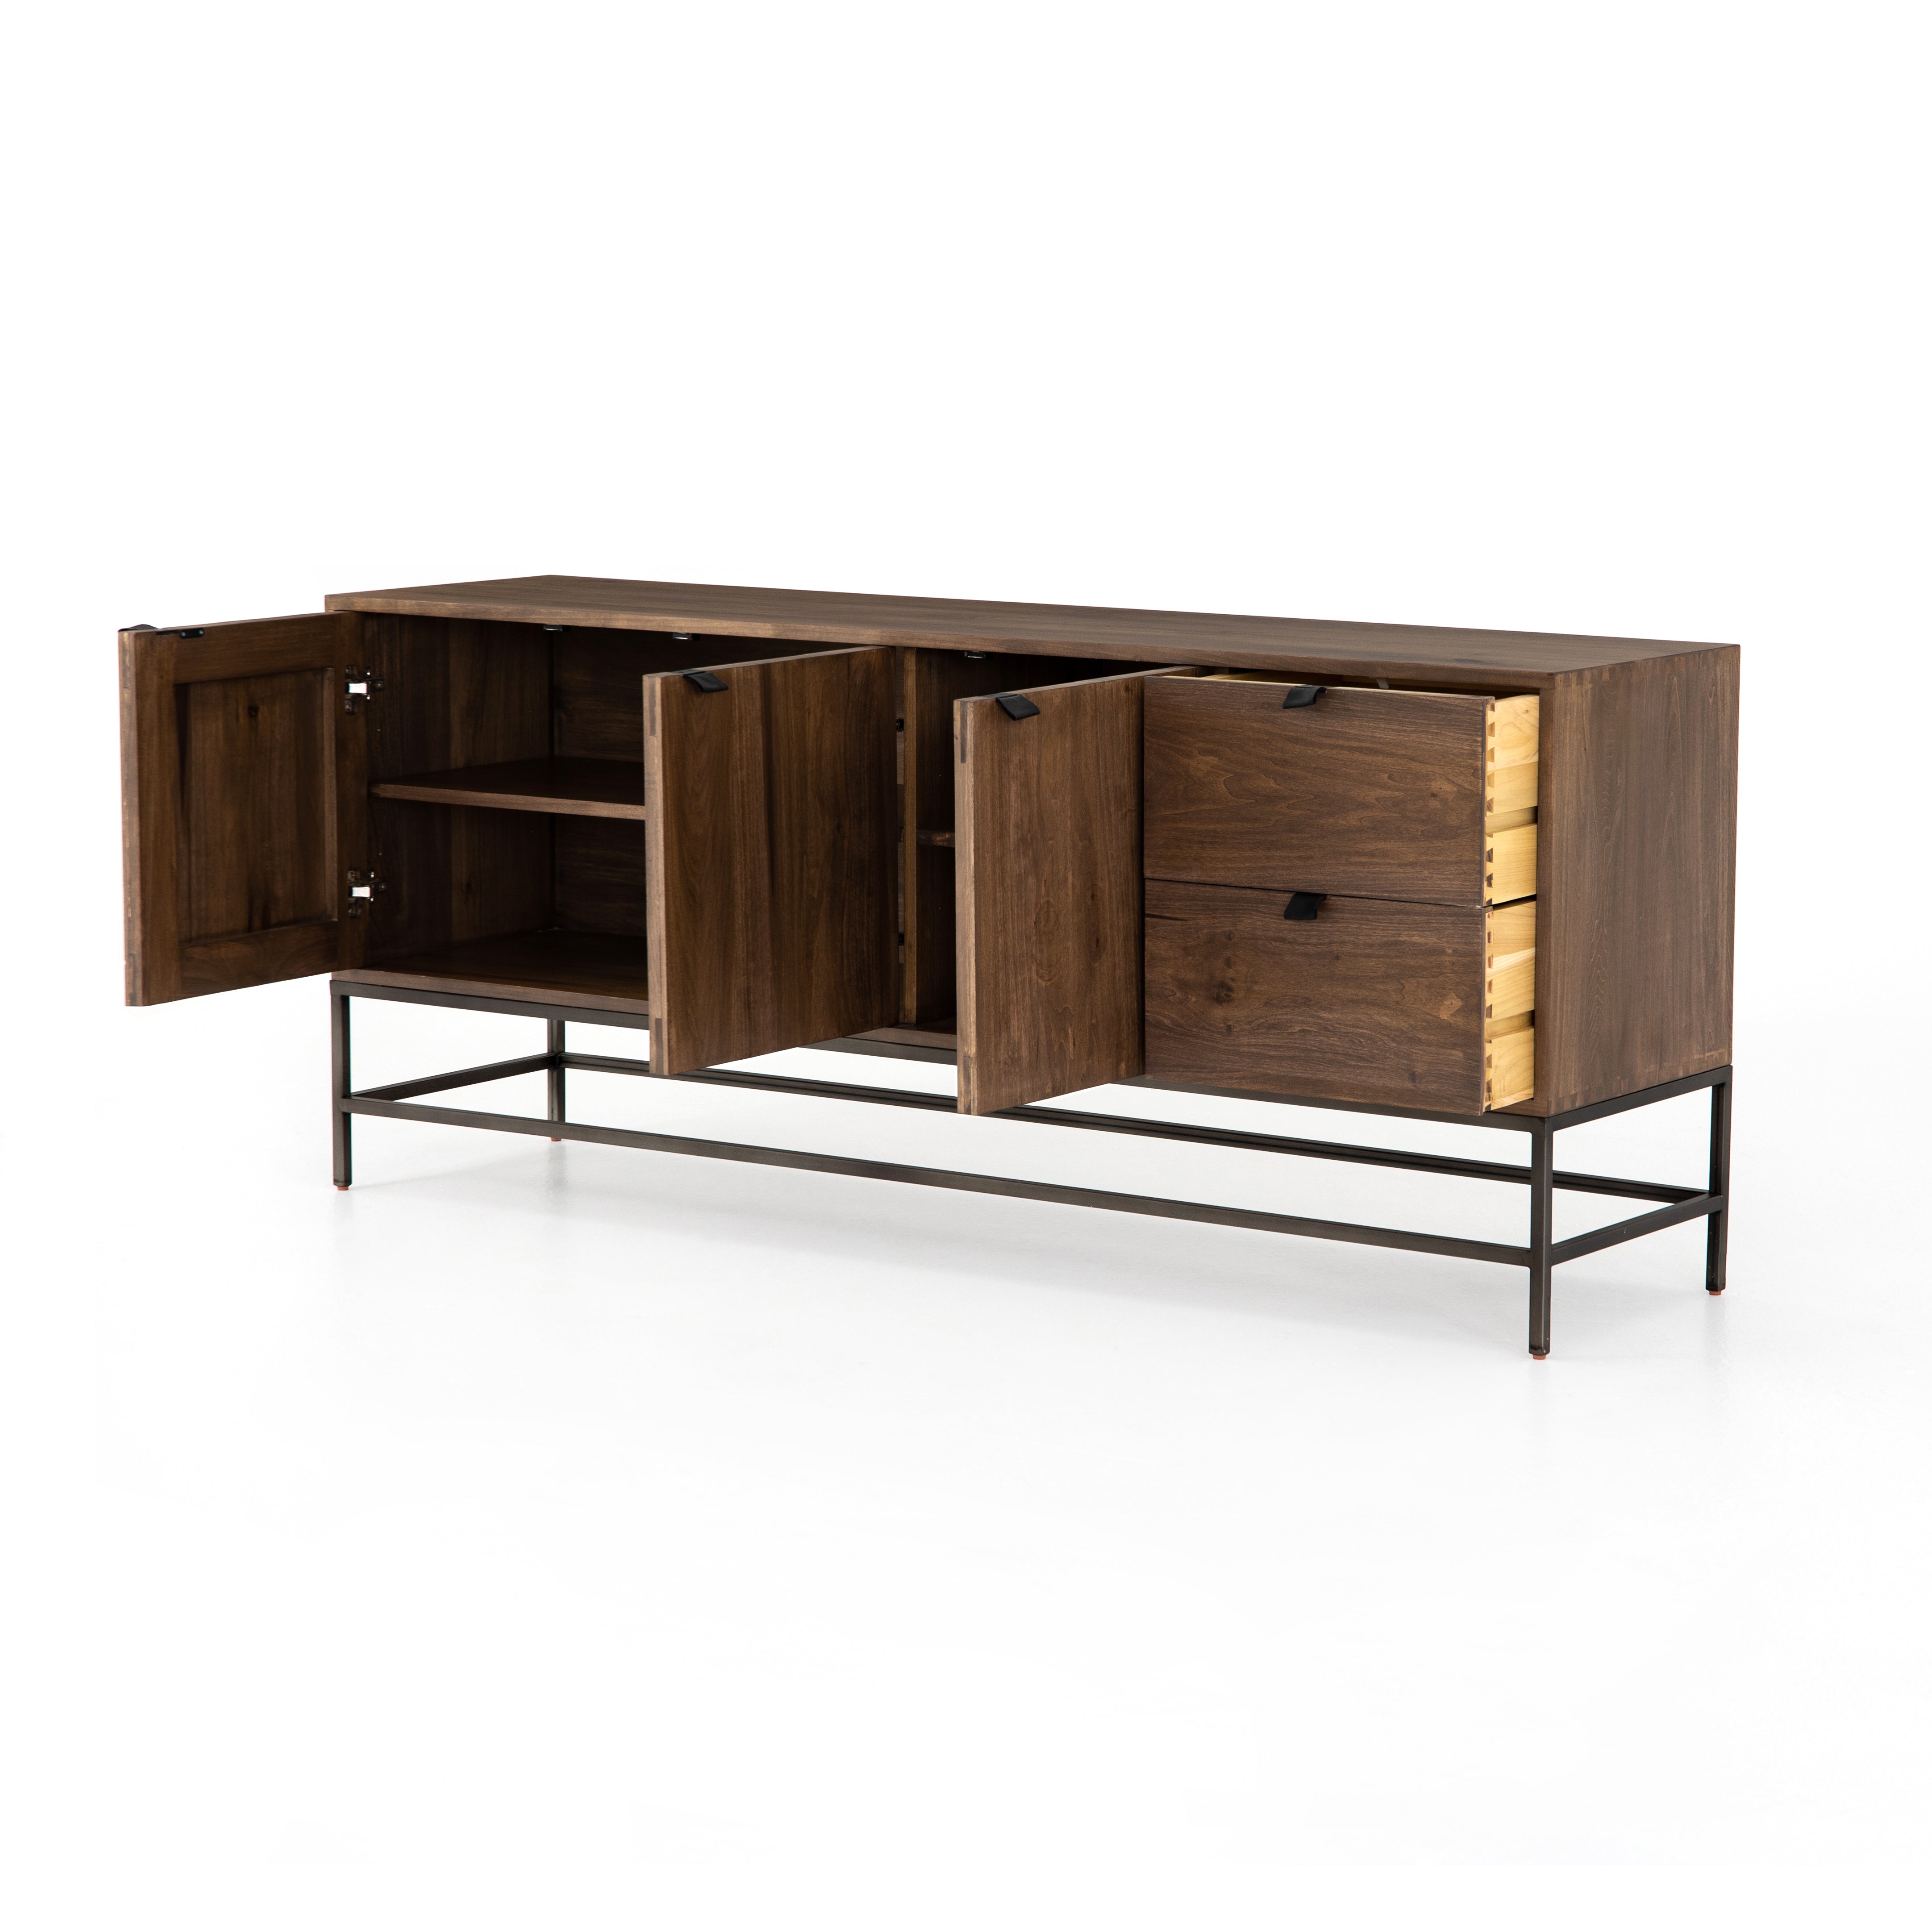 We love the clean, slim legs of this Trey Auburn Poplar Sideboard. The doors and drawers make this the perfect sideboard for families wanting extra storage space while also making a statement  Size: 72"w x 18"d x 31"h Materials: Iron, Poplar, Top Grain Leather